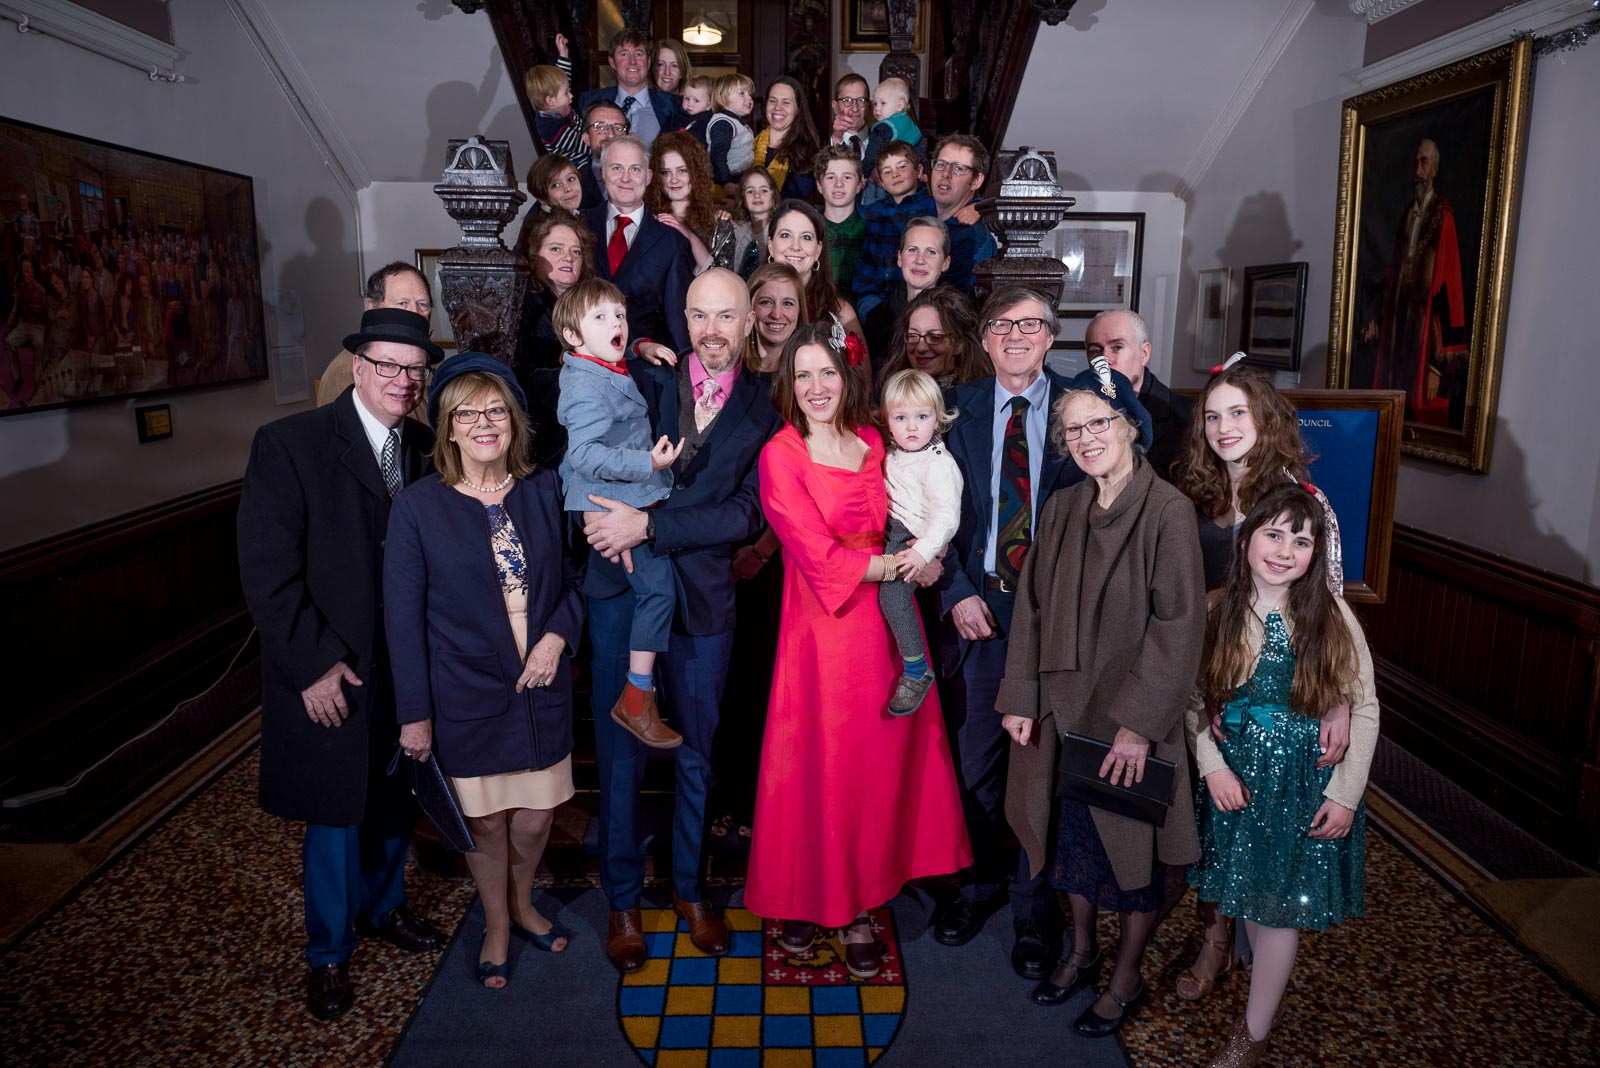 Annie. Mark and their wedding guests pose for a group photo on the stairs at Lewes Town Hall.